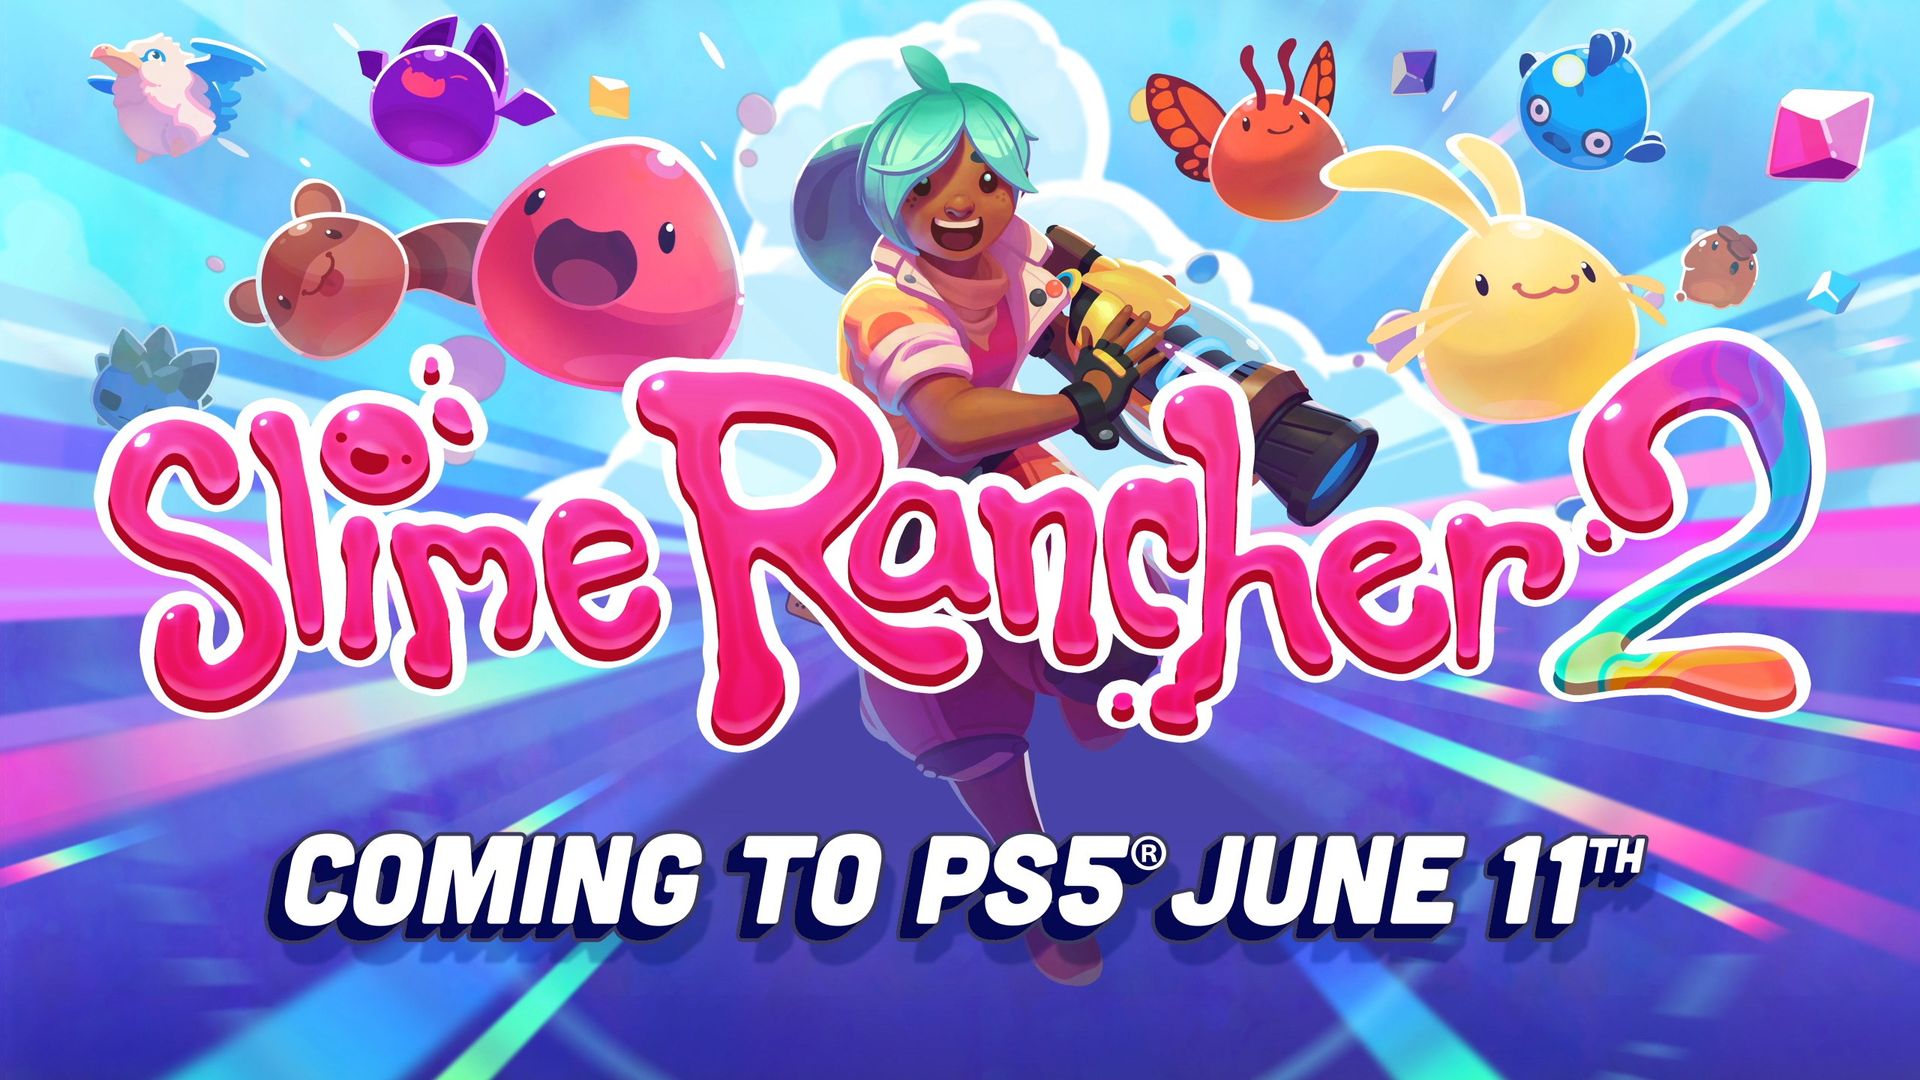 Slime Rancher 2 coming to PS5 on June 11